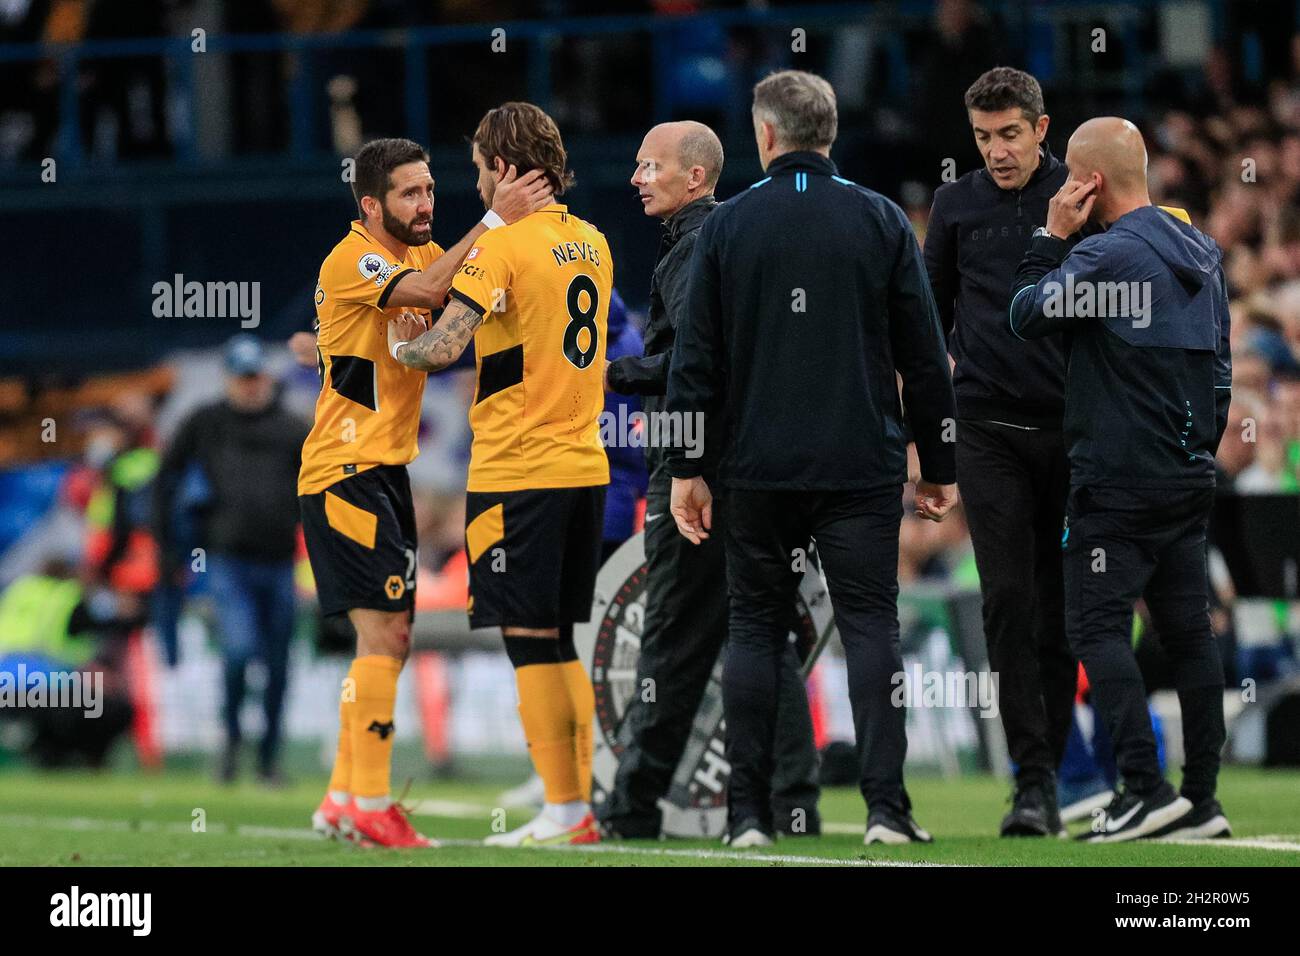 Joao Moutinho #28 of Wolverhampton Wanderers is substituted for Ruben Neves #8 of Wolverhampton Wanderers during the game Stock Photo